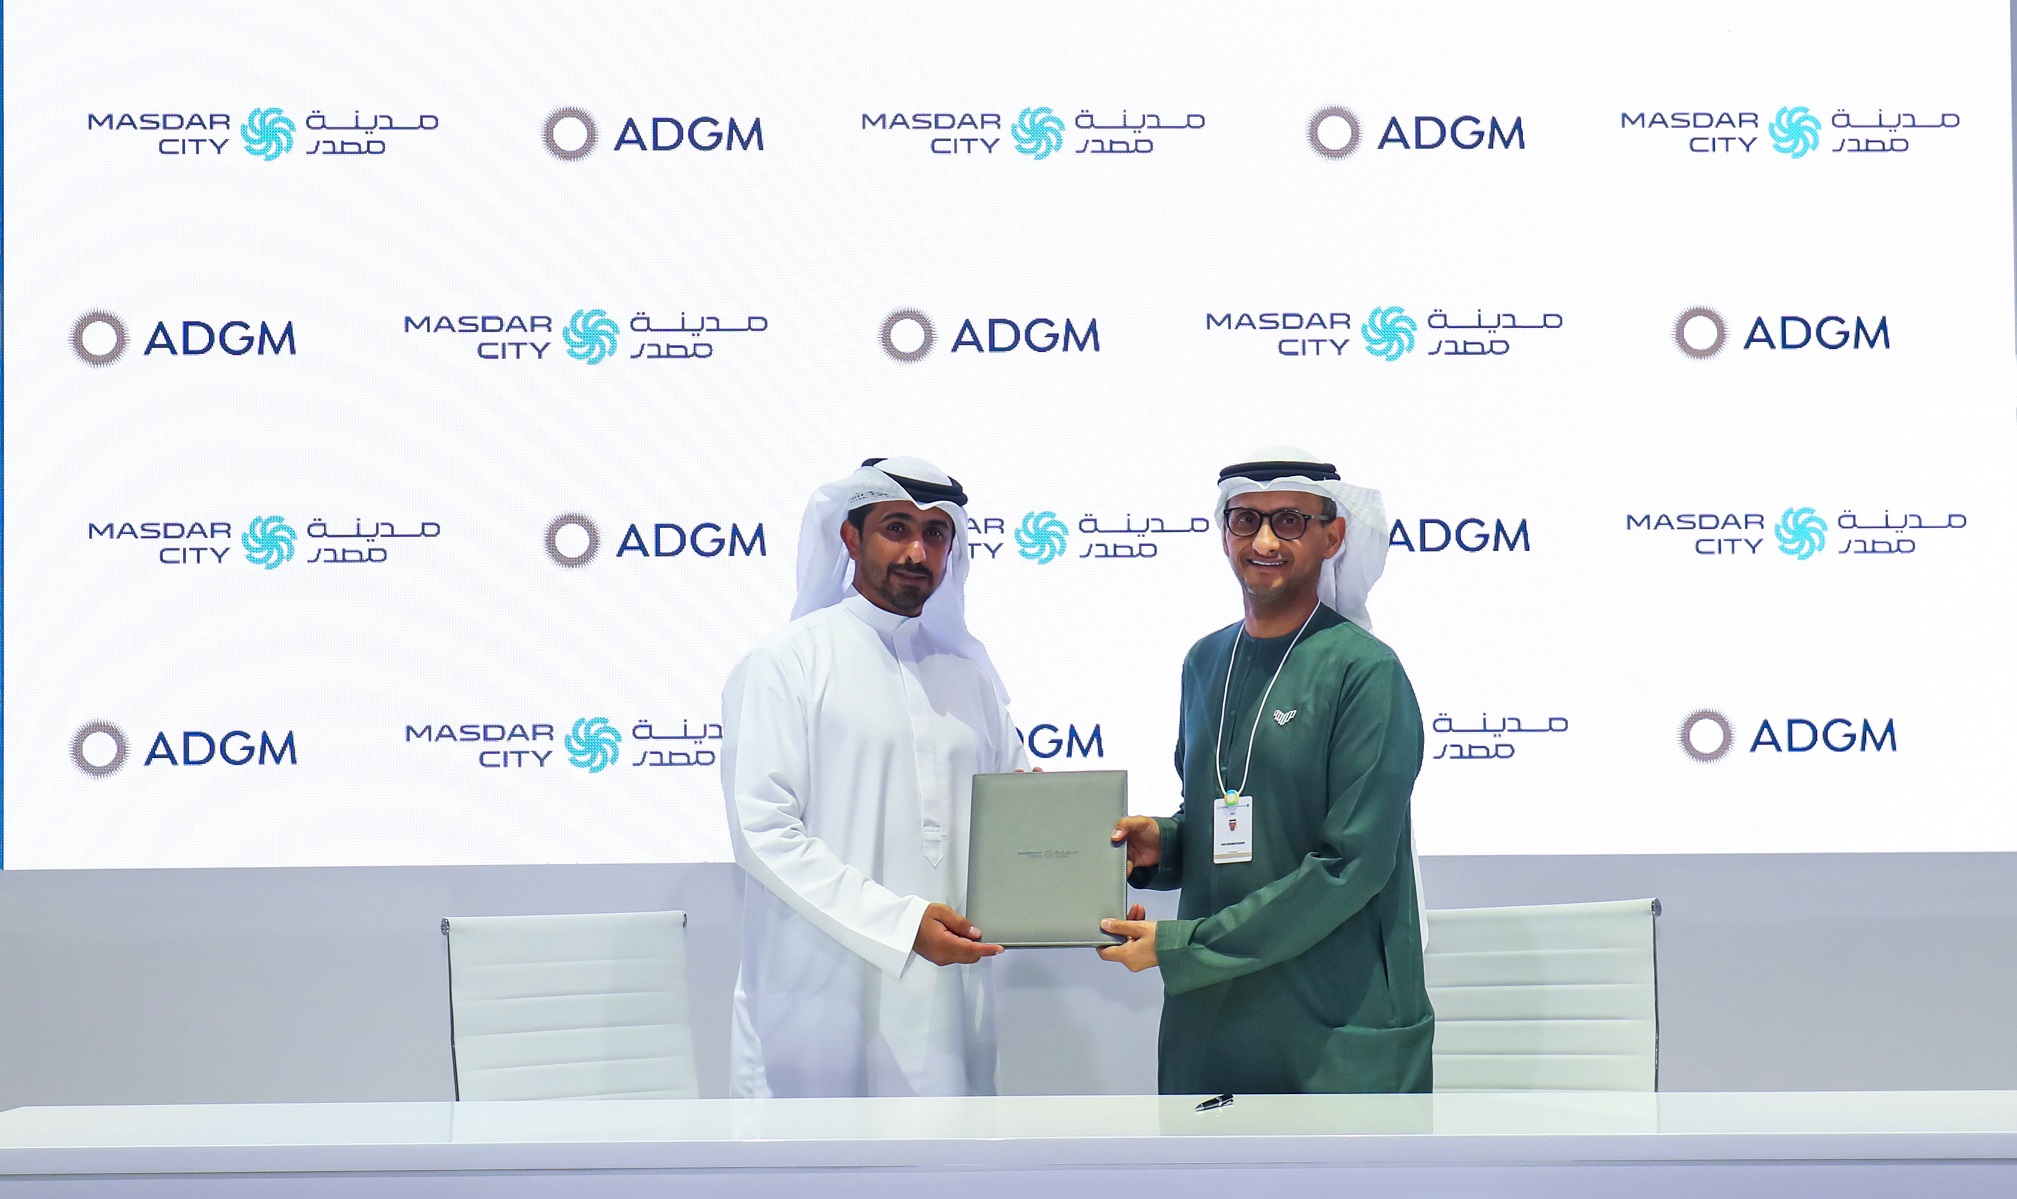 Masdar City And ADGM Sign Strategic Agreement To Create New Pathways For Abu Dhabi Businesses And Enhance Innovation